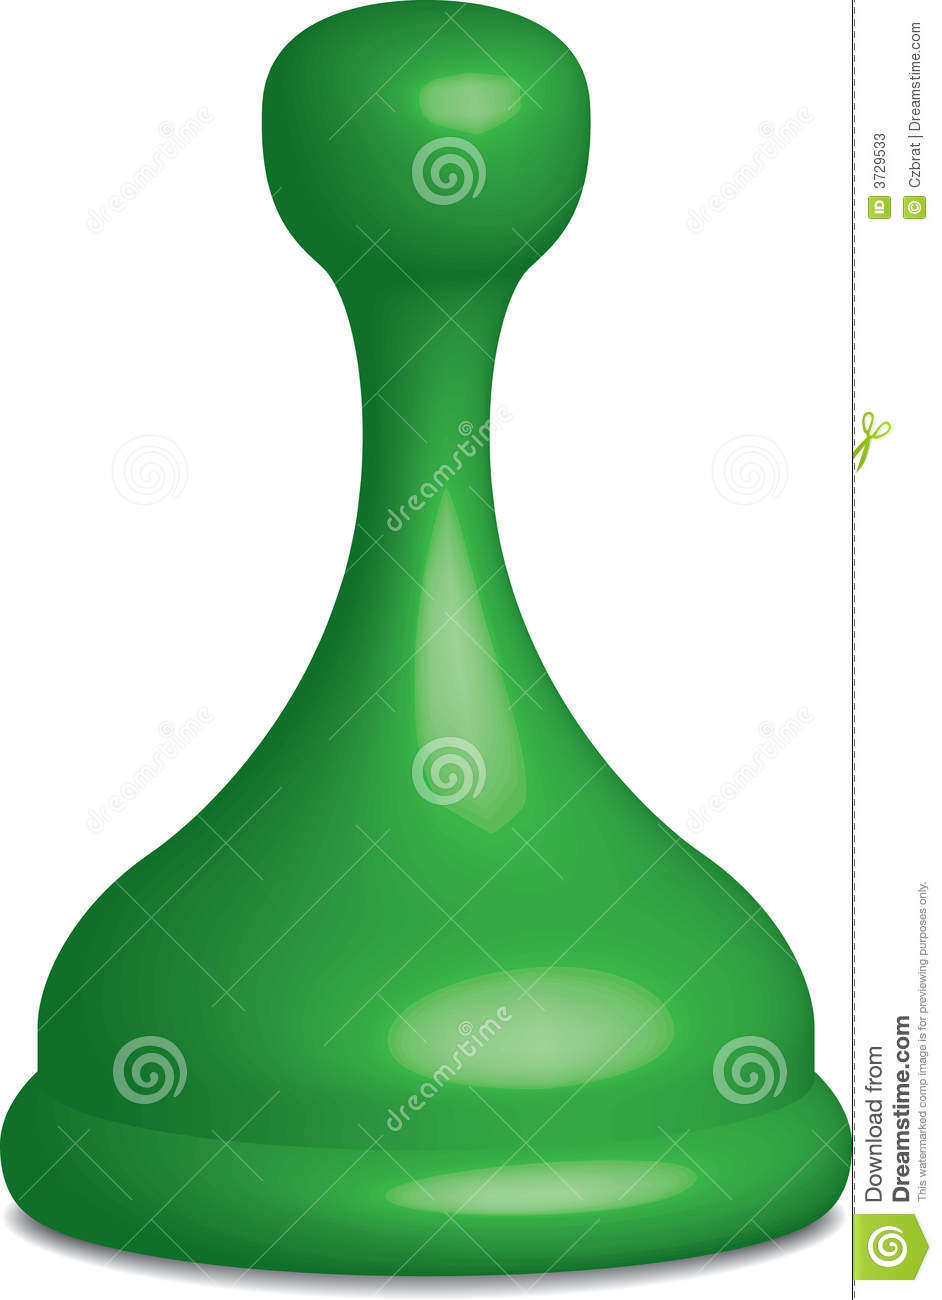 3d Render Of A Greenplastic Game Piece  Vector Image Is Included